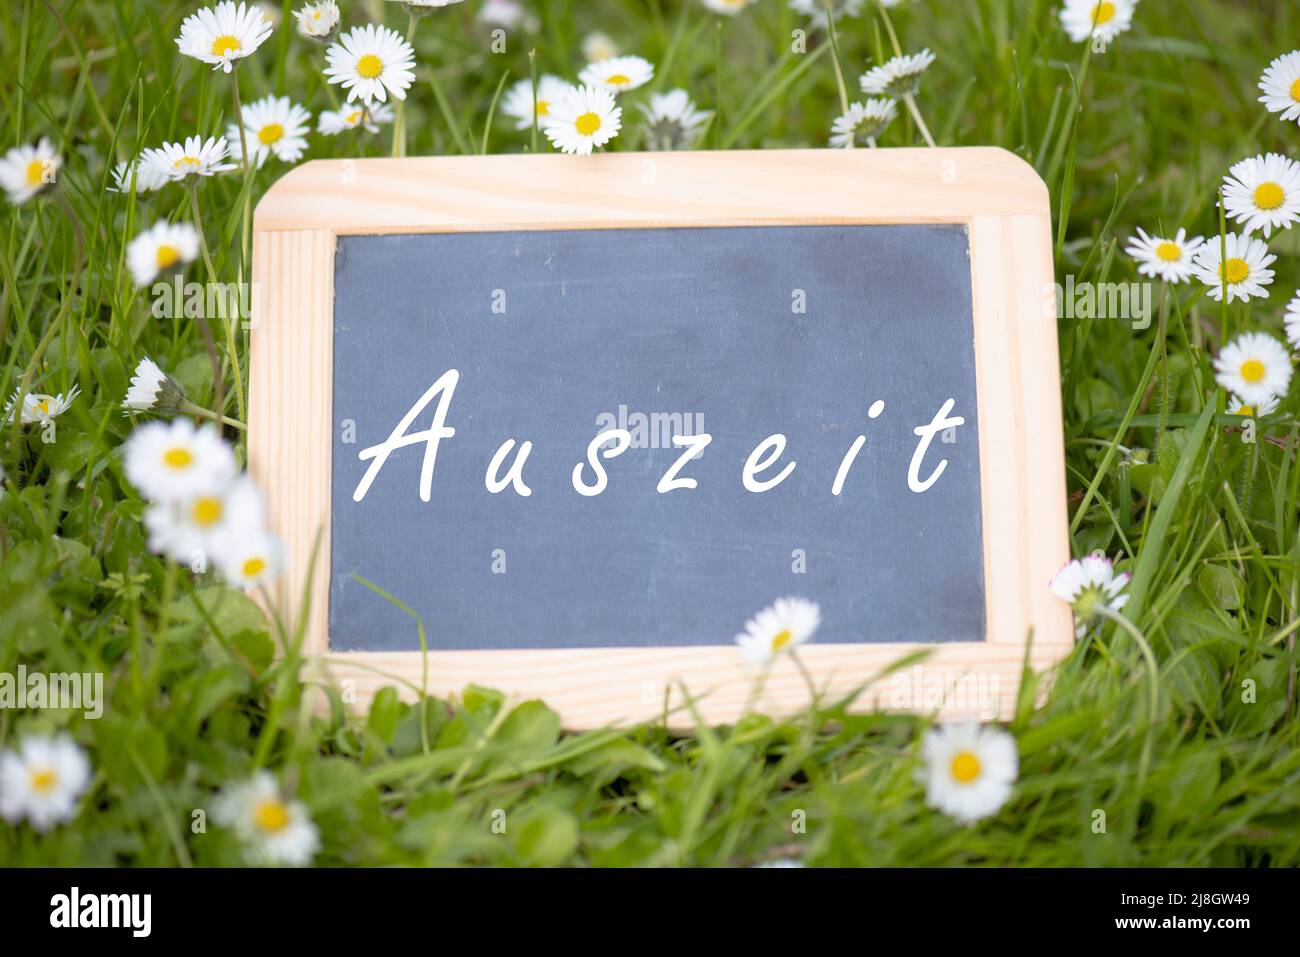 Chalkboard with the word time out, german language stands in the meadow with daisy flowers, taking a vacation, spring and summer season Stock Photo